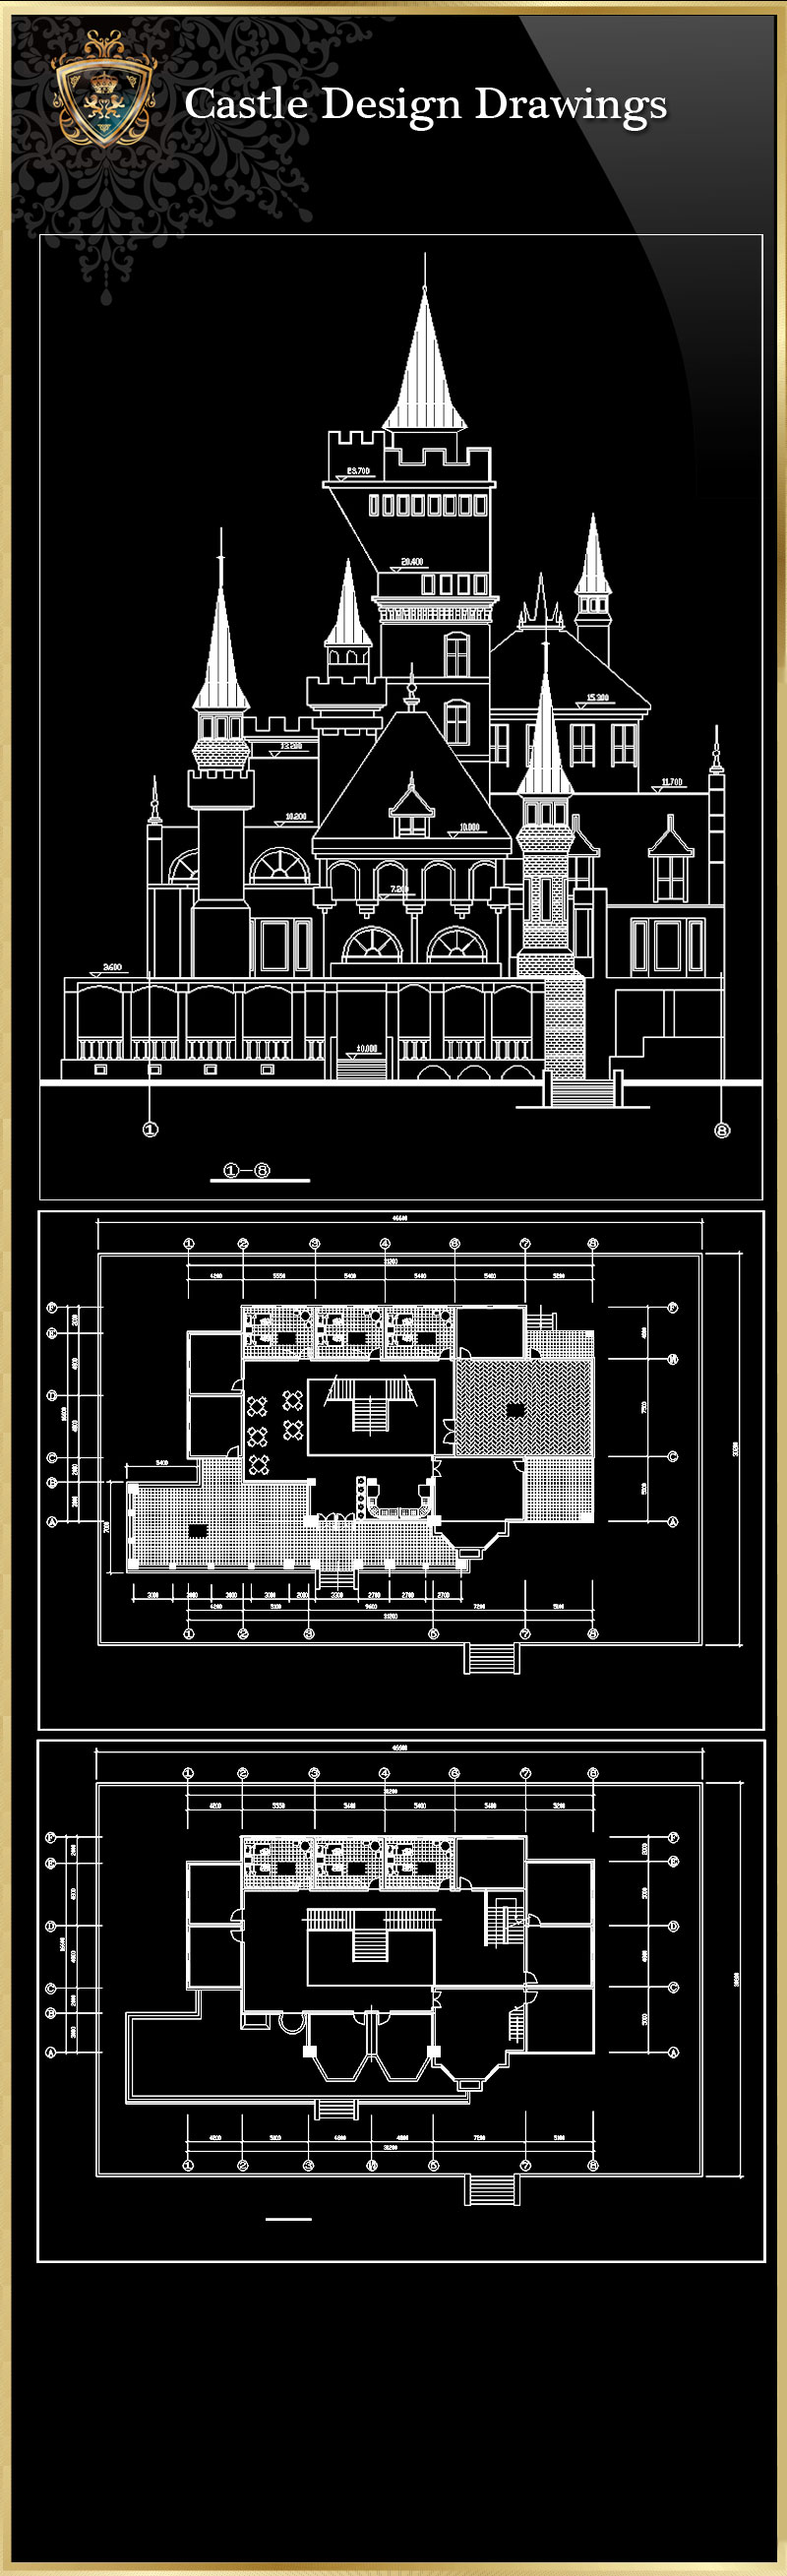 ★【Castle Design 1】Download Luxury Architectural Design CAD Drawings--Over 20000+ High quality CAD Blocks and Drawings Download!